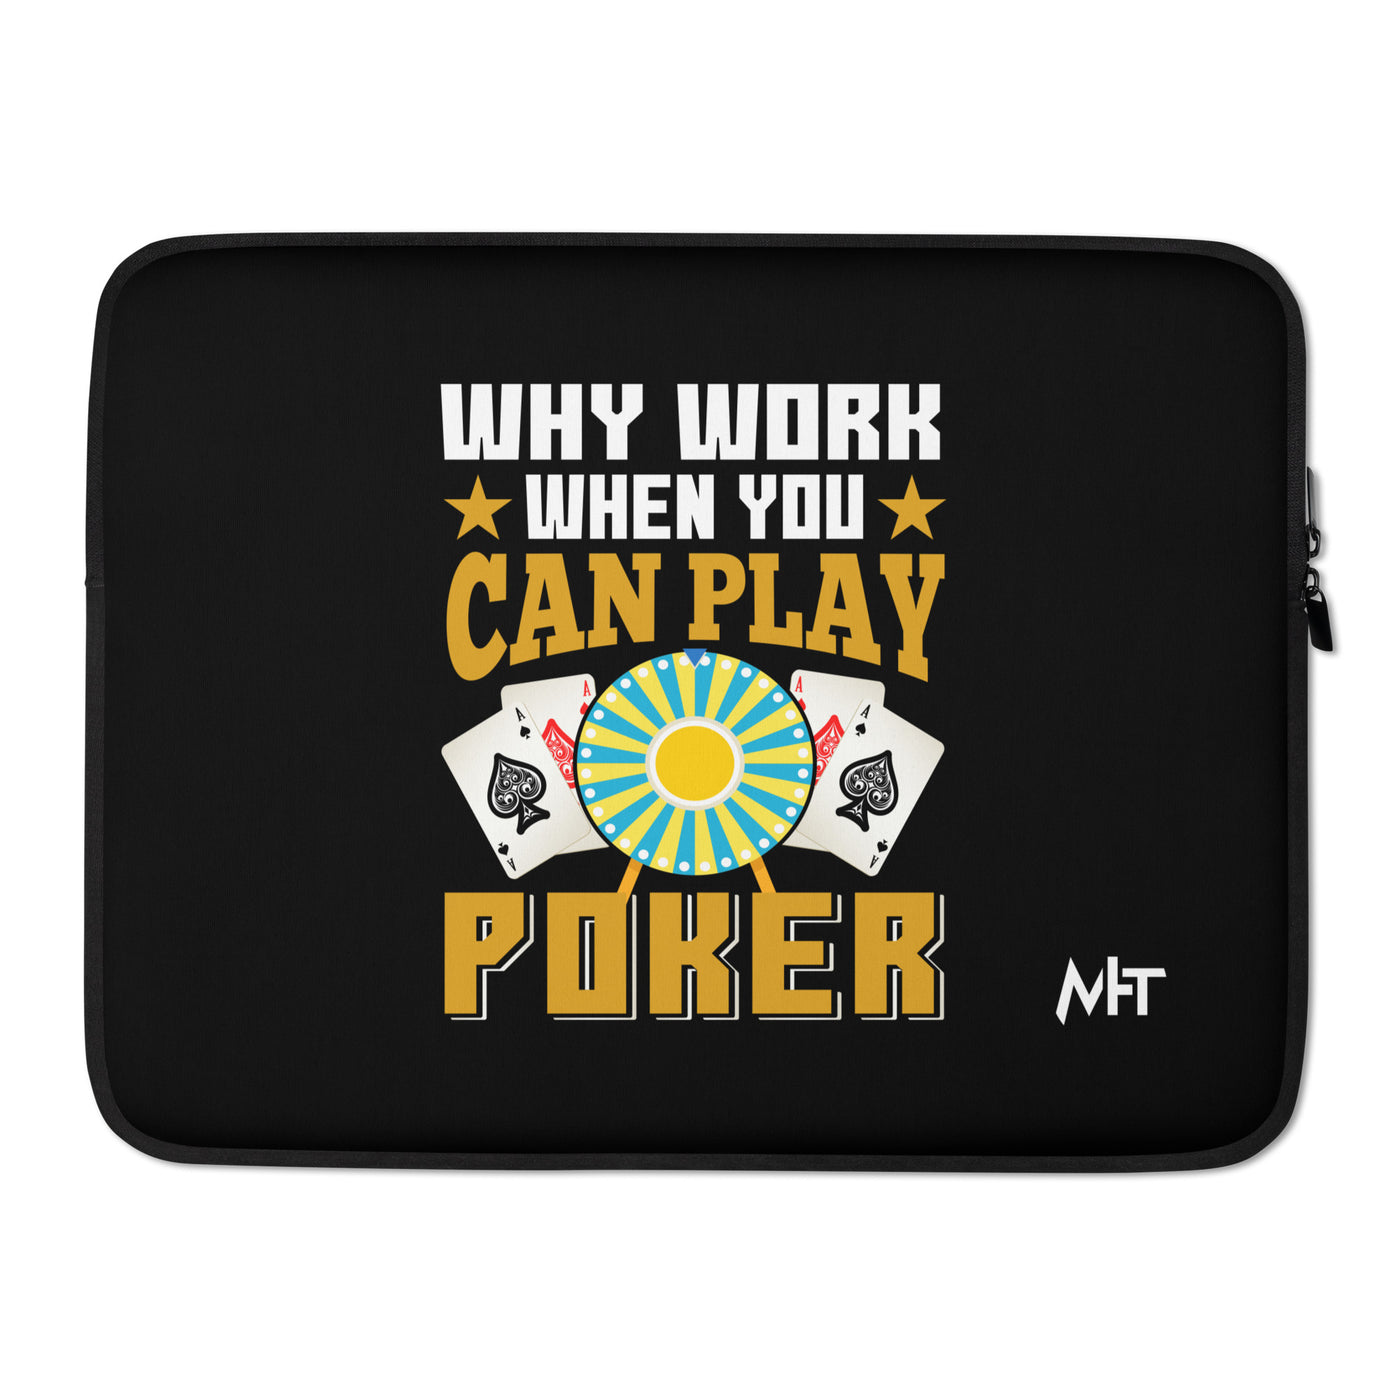 Why Work when you can Play Poker - Laptop Sleeve